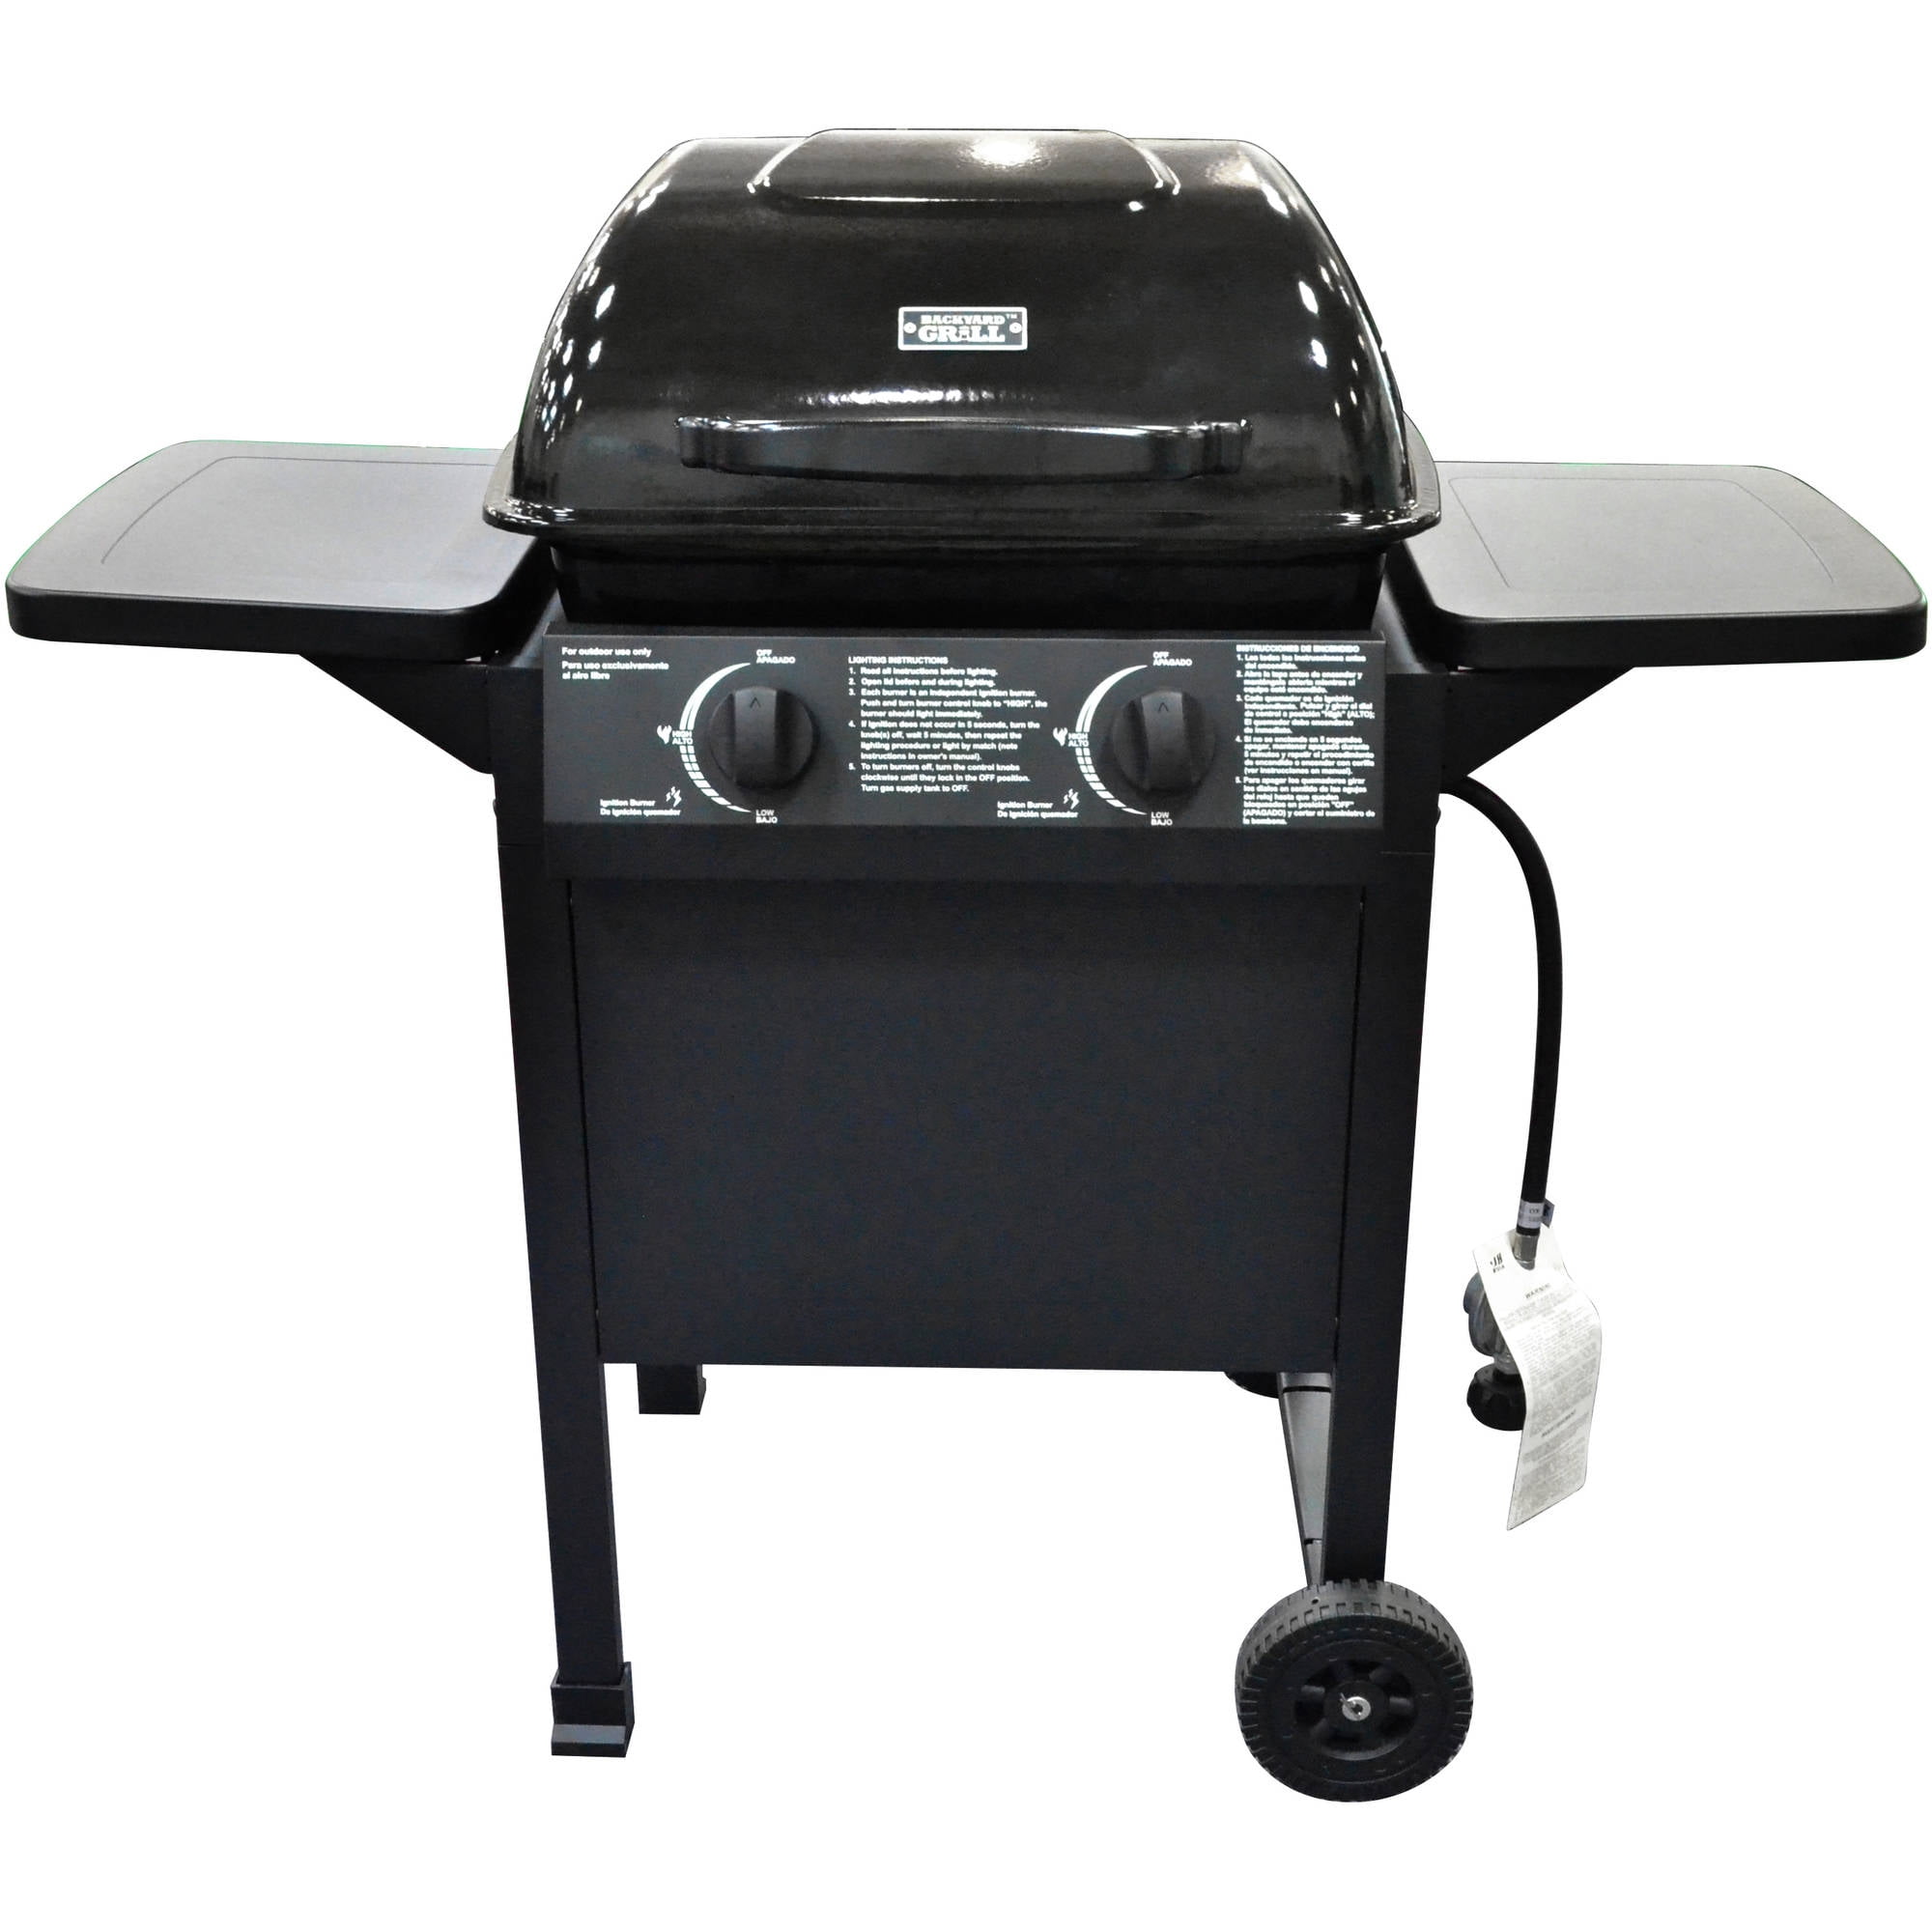 Outdoor Gas Grills Near Me Propane Gas Griddle Cooking